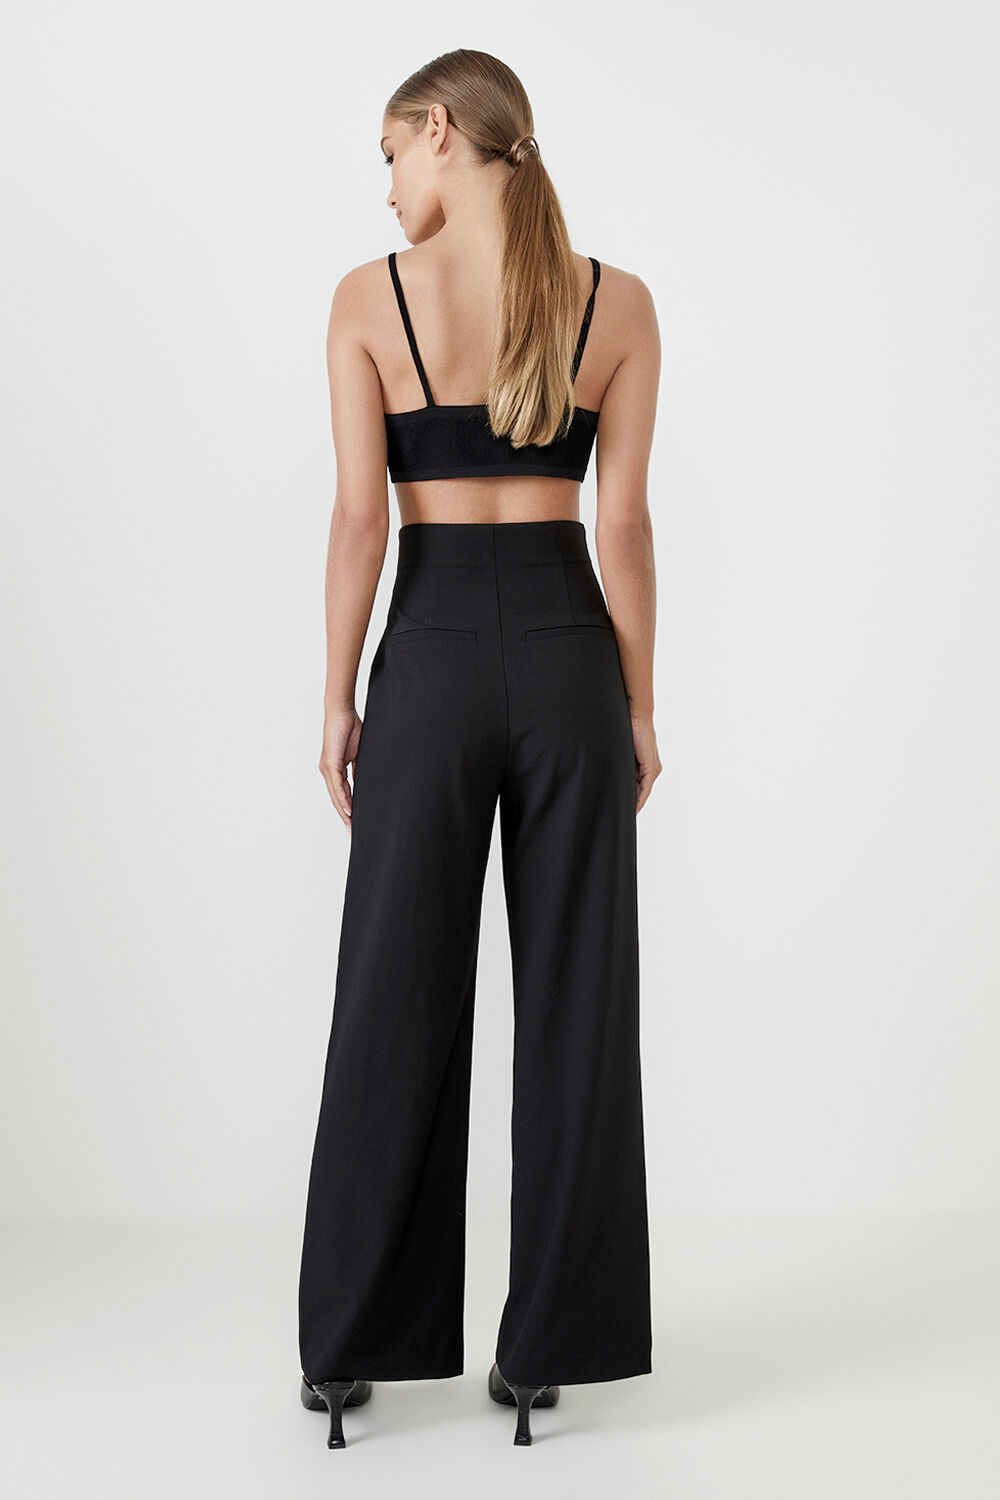 Women's Trousers & Shorts | Wide Leg, Cropped & More | Phase Eight |